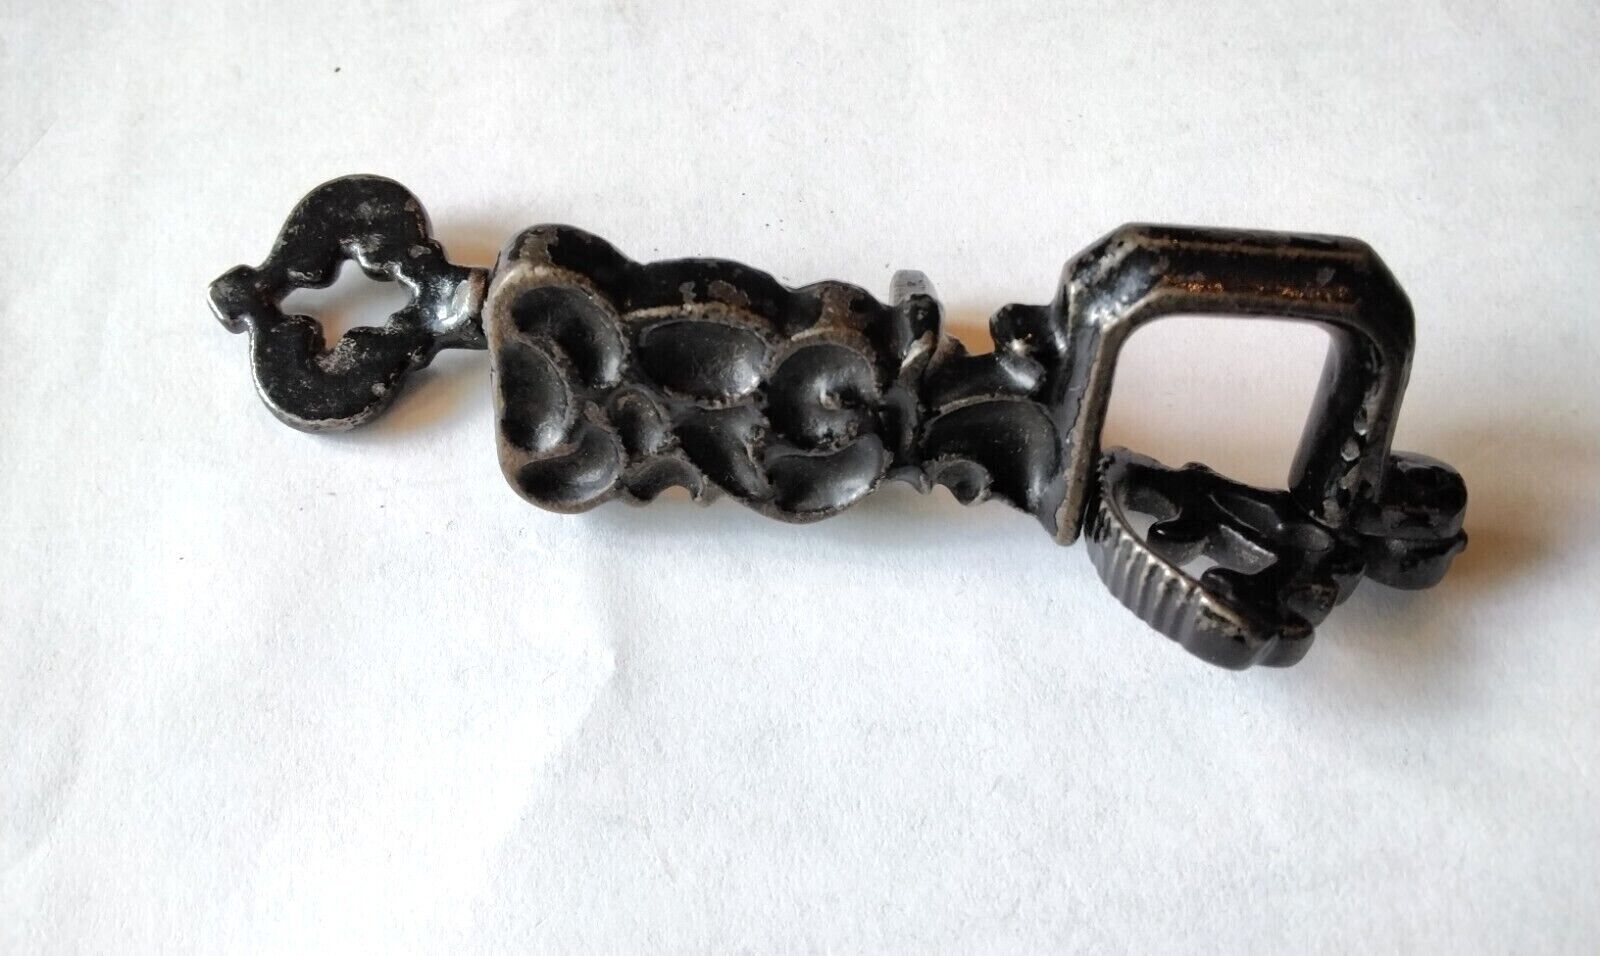 ANTIQUE CIRCA LATE 1800's,ORNATE VICTORIAN CAST IRON SEWING/QUILTING CLAMP